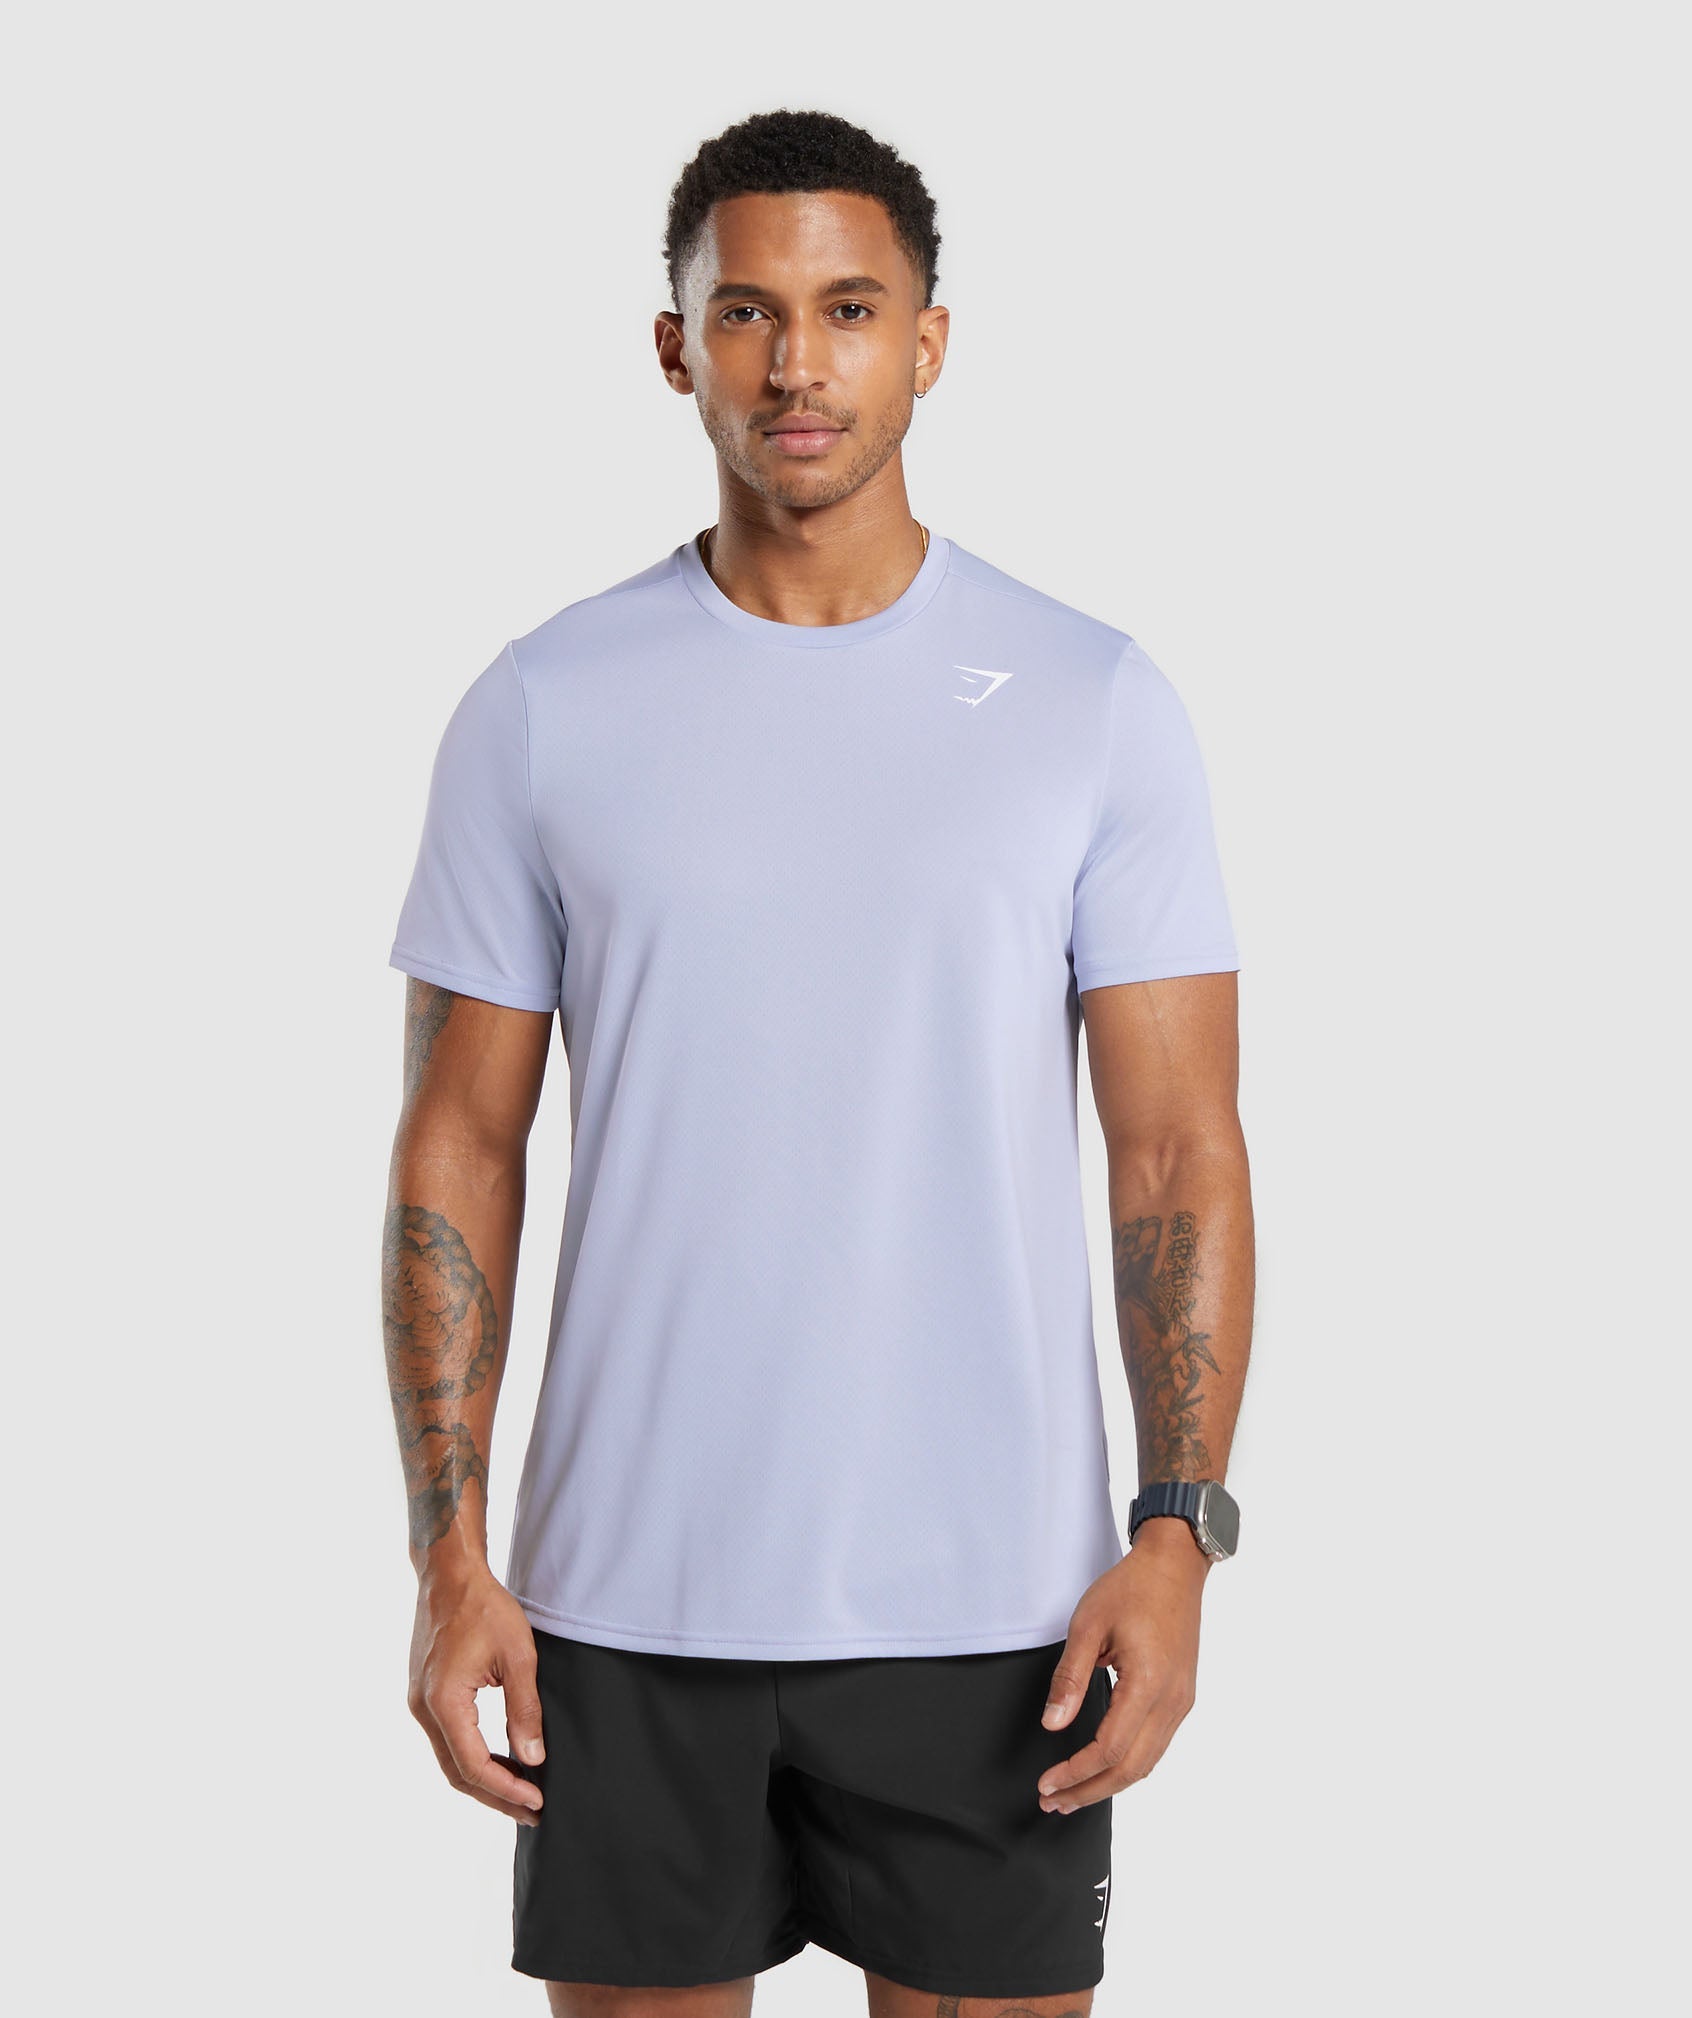 Arrival Regular Fit T-Shirt in Silver Lilac